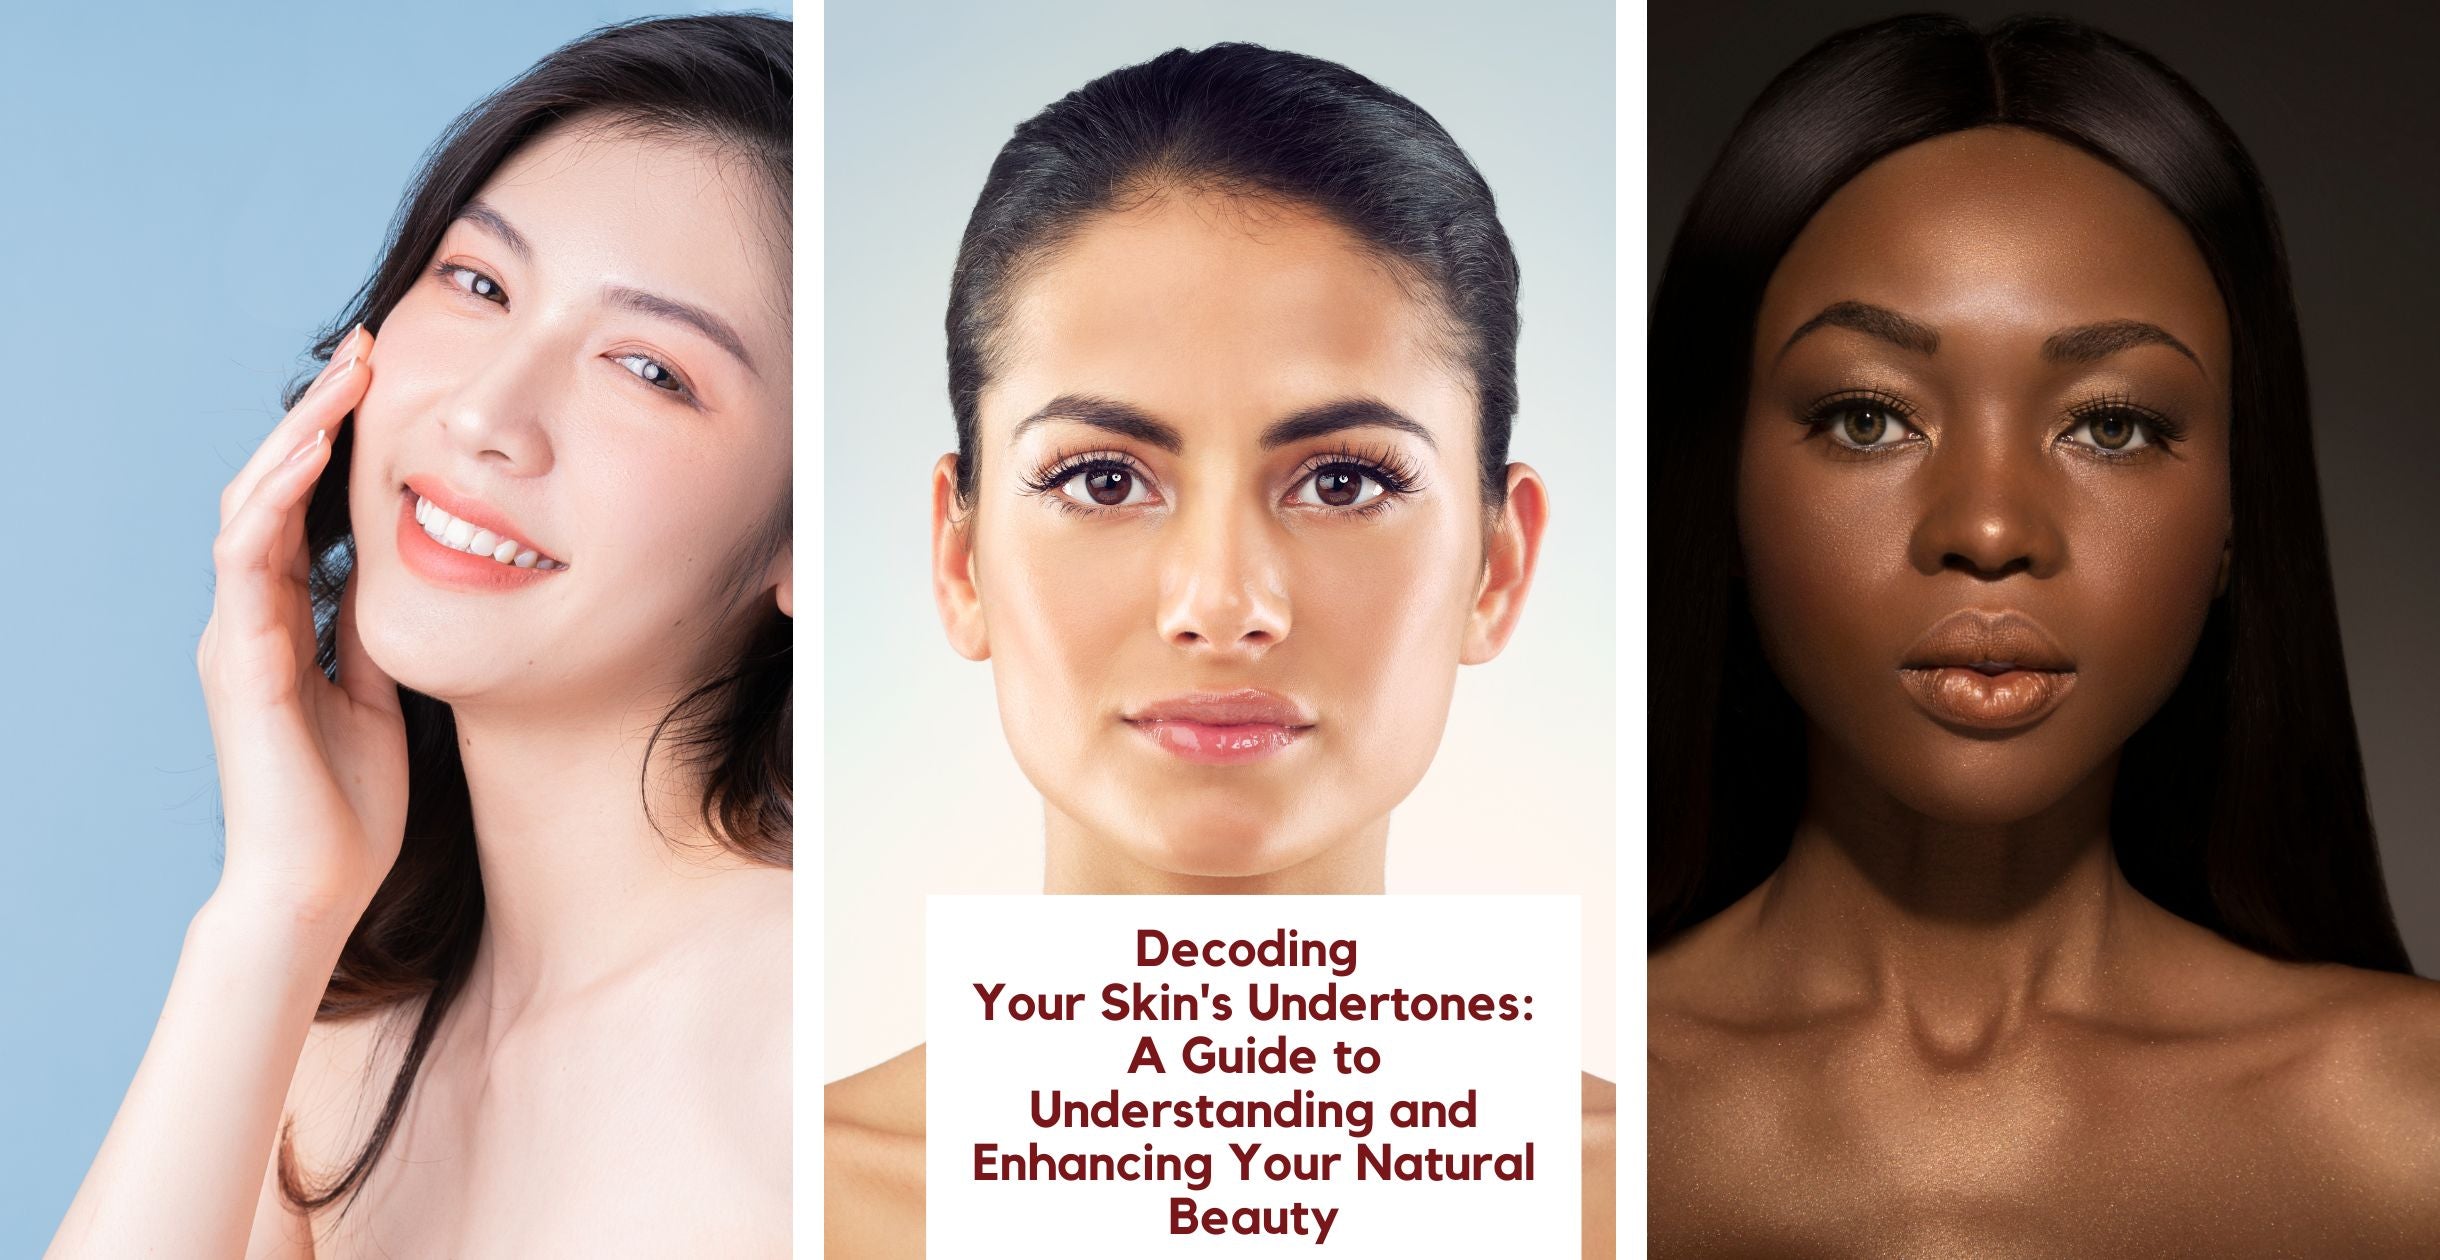 Decoding Your Skin's Undertones: A Guide to Understanding and Enhancing Your Natural Beauty